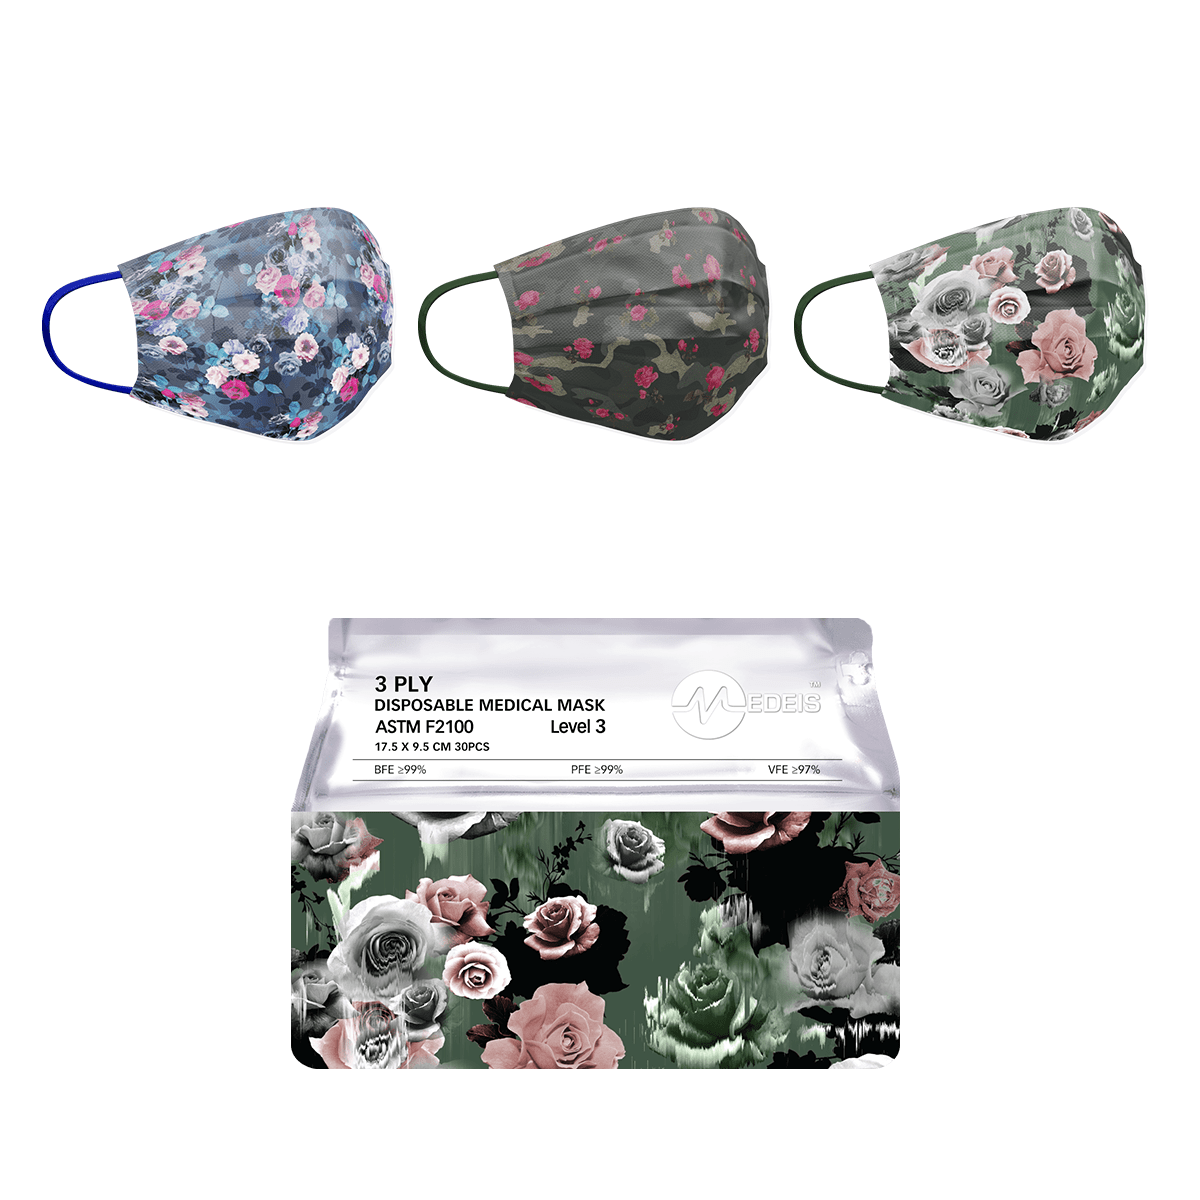 HELMS STORE Masks Rosey Adults Disposable Face Masks - Level 3 - Bag of 30